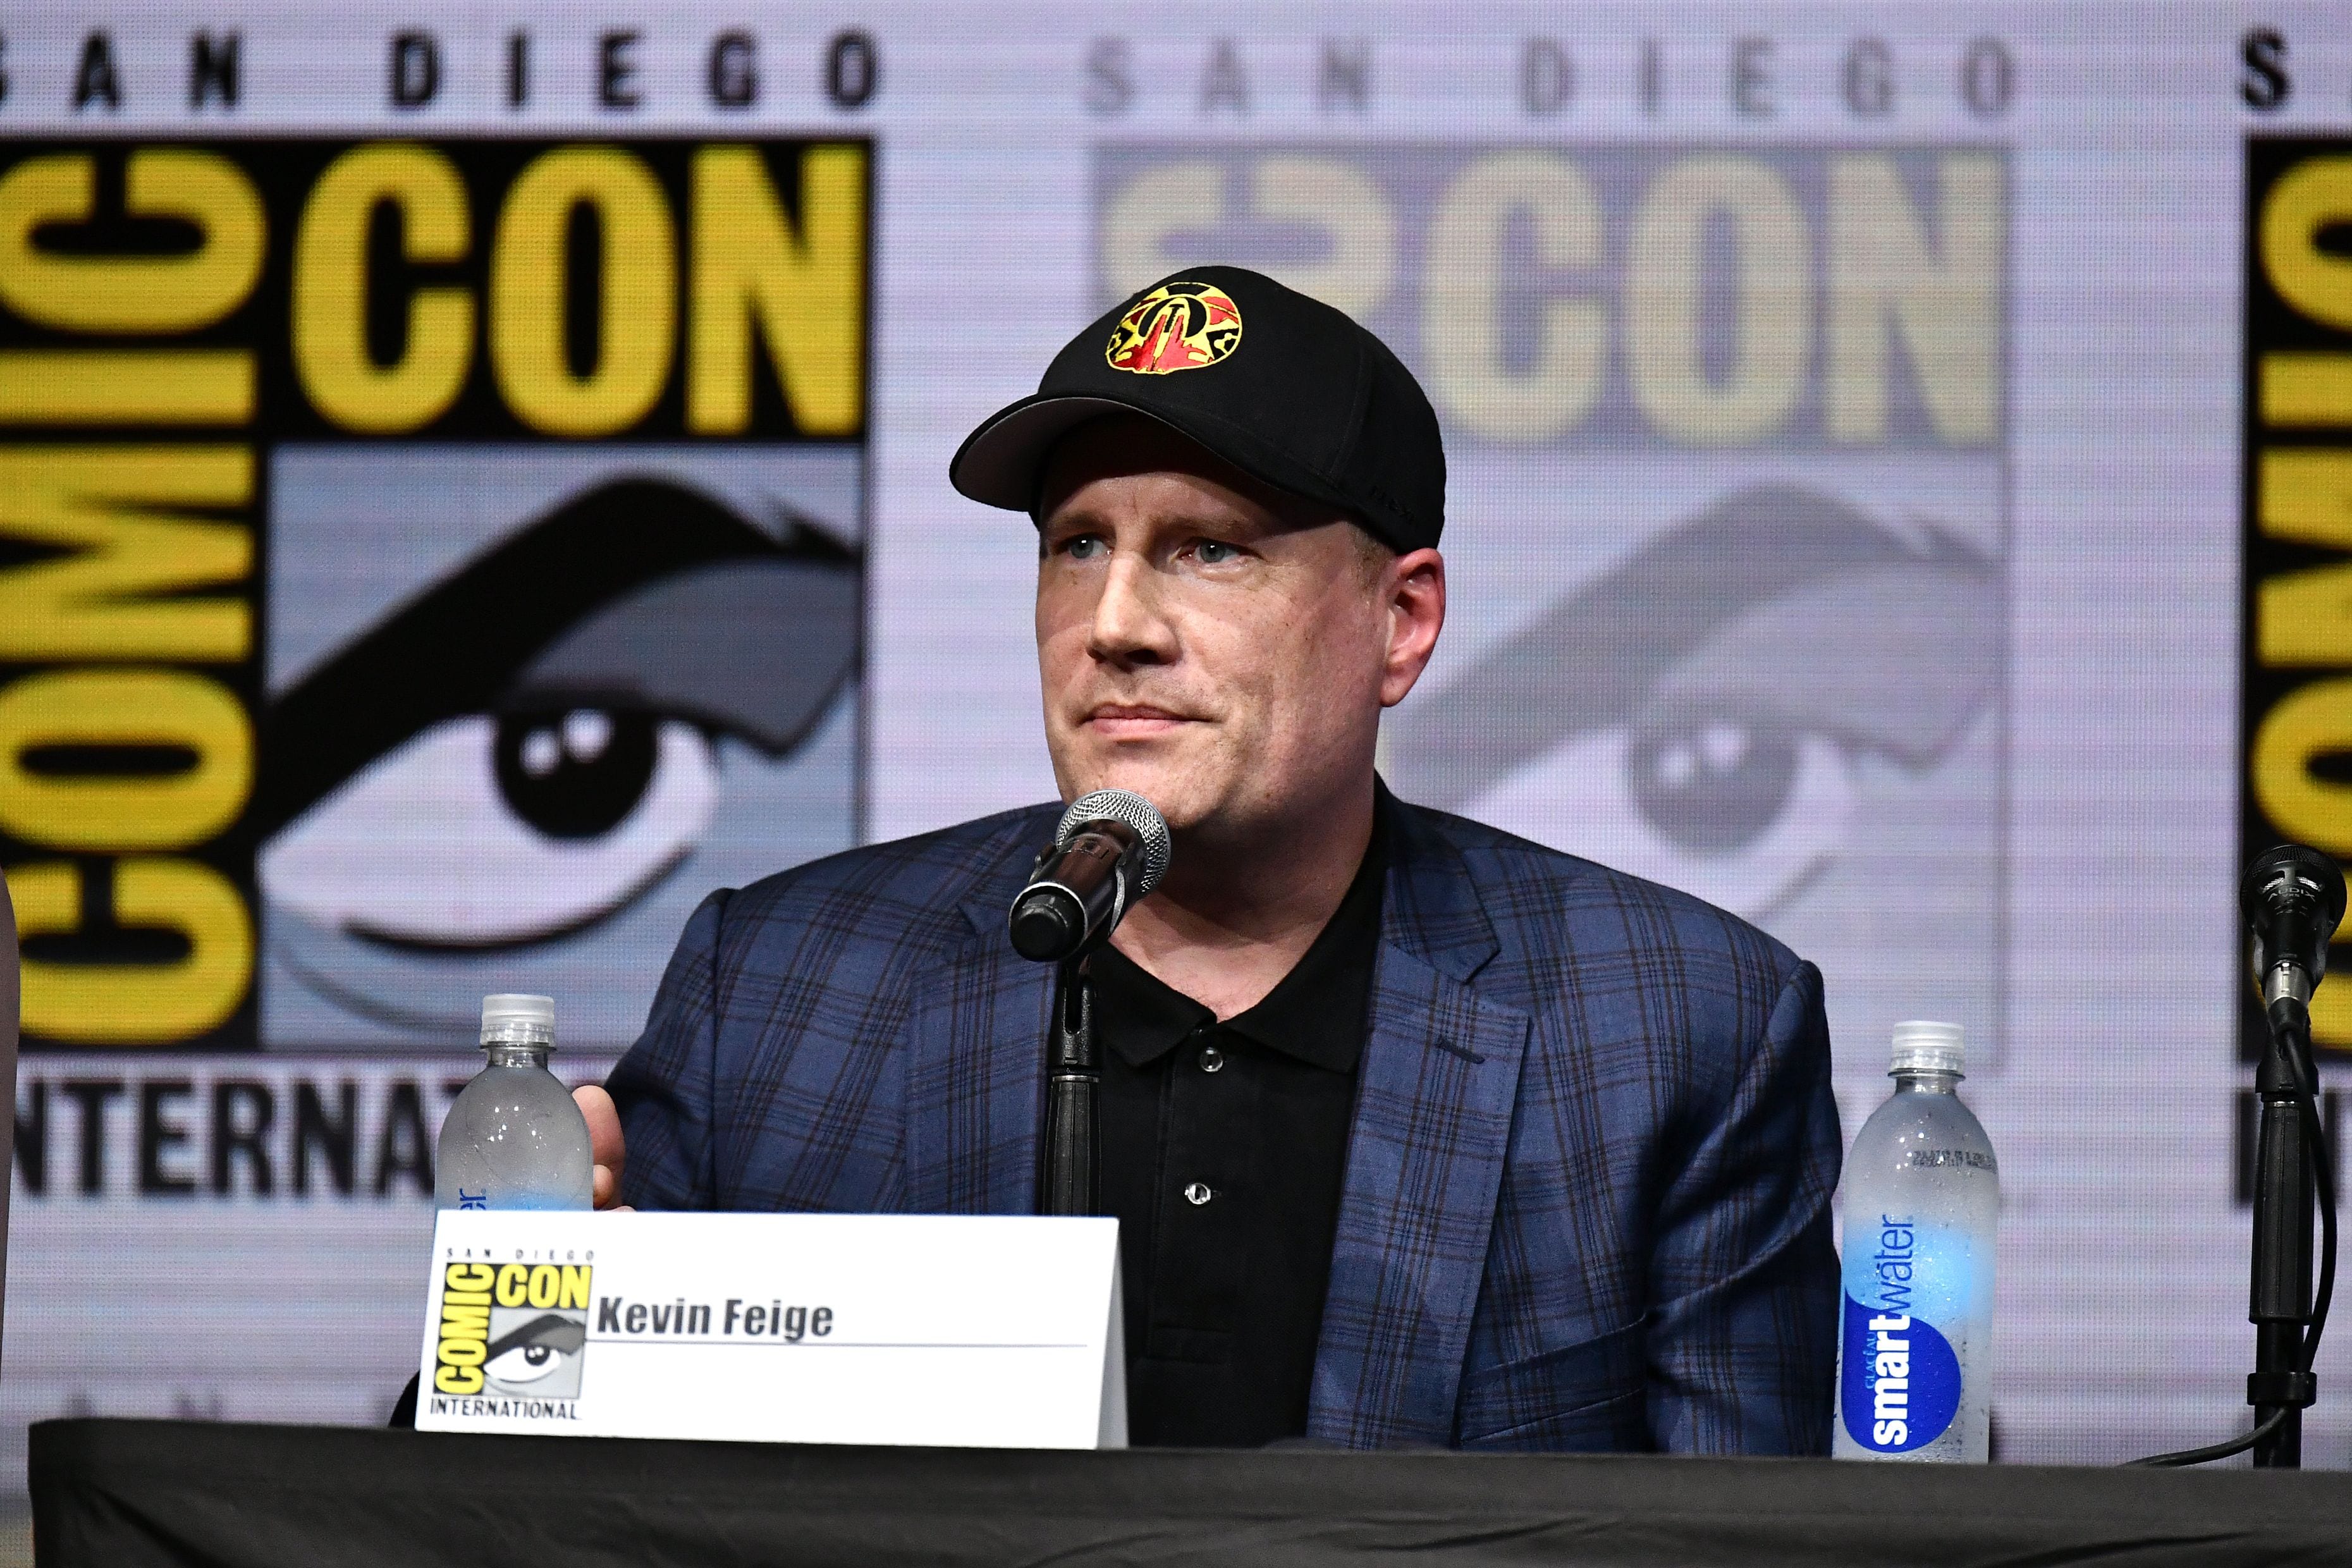 Kevin Feige On The Expanding Marvel Universe On Disney Plus  And How Studios Is Planning To Counter The Oversaturation Of Characters